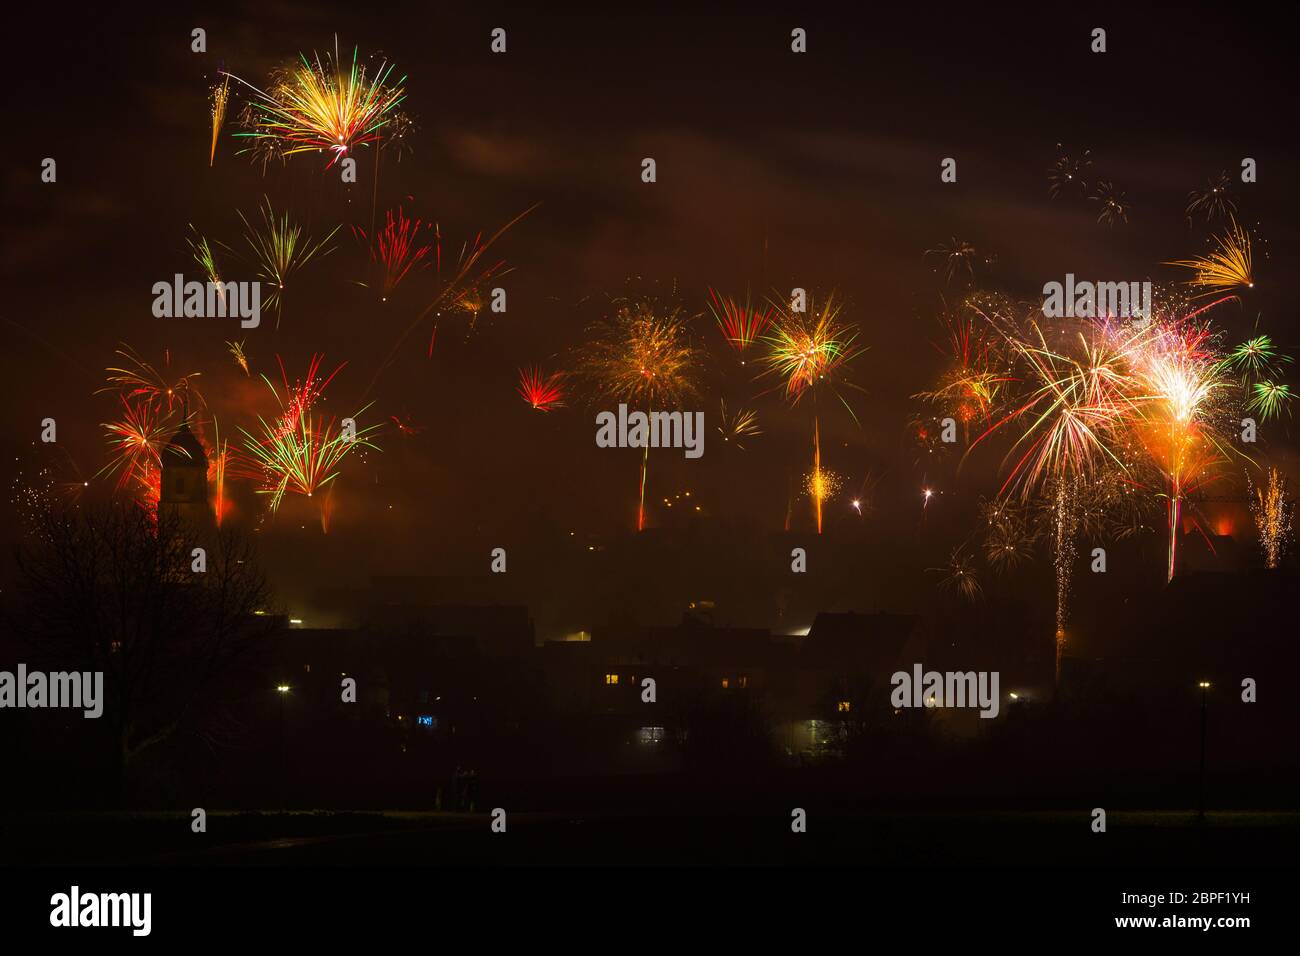 fireworks on new years eve with colorful rockets Stock Photo